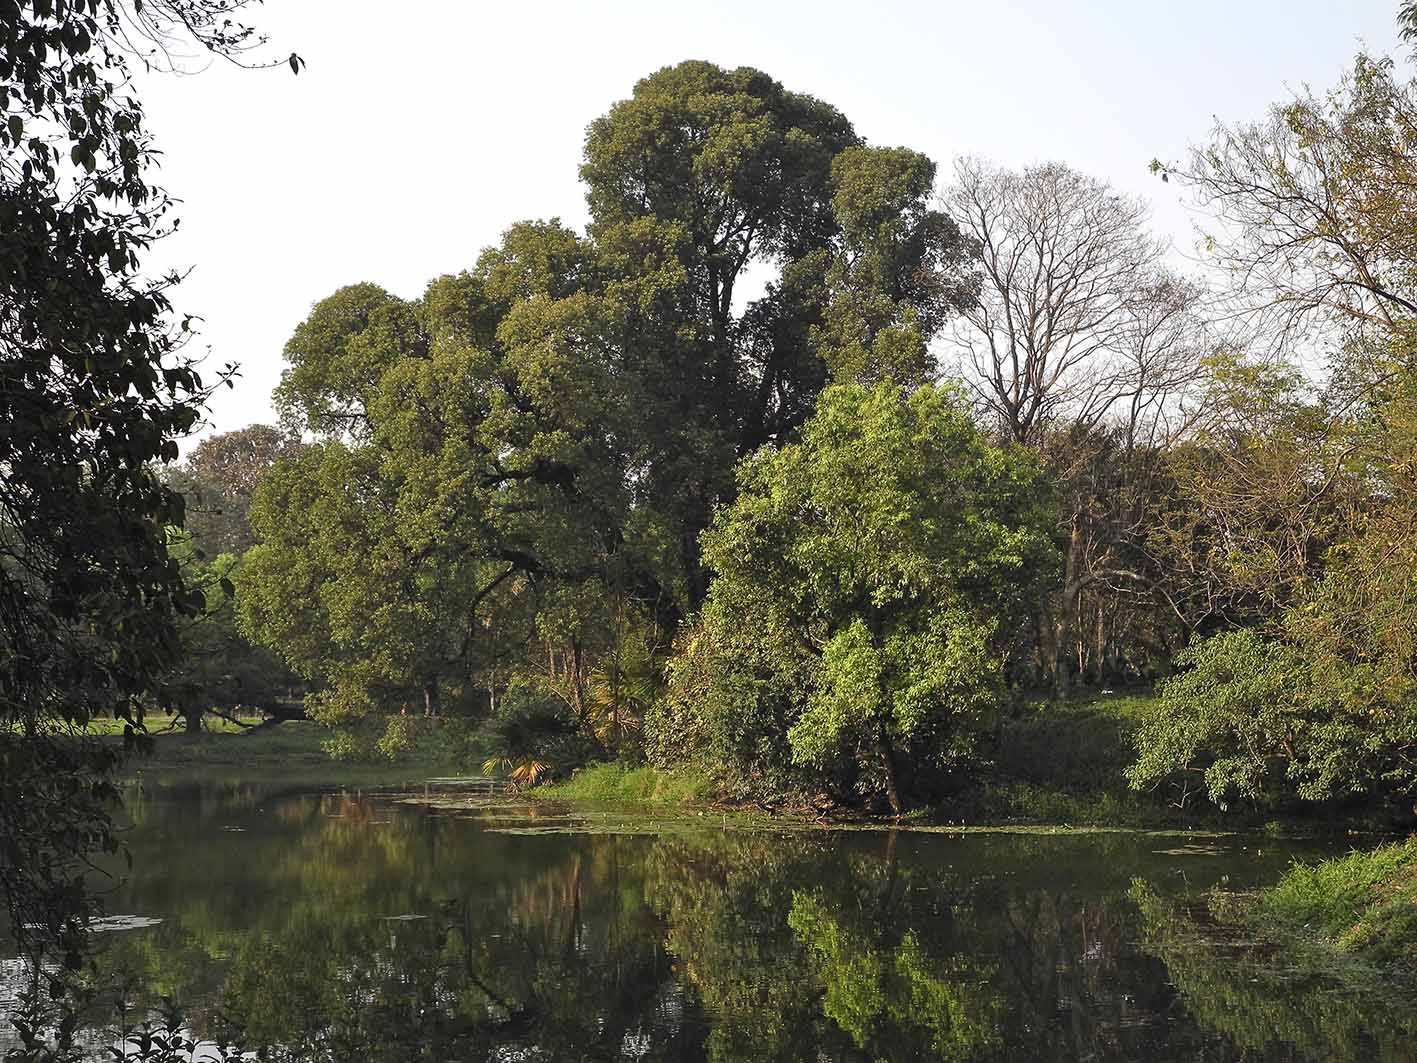 One of the lakes created in the centre of the Royal Botanic Garden, Calcutta, during the 1880s, now known as the Acharya Jagadish Chandra Bose Indian Botanic Garden in Shibpur, Howrah